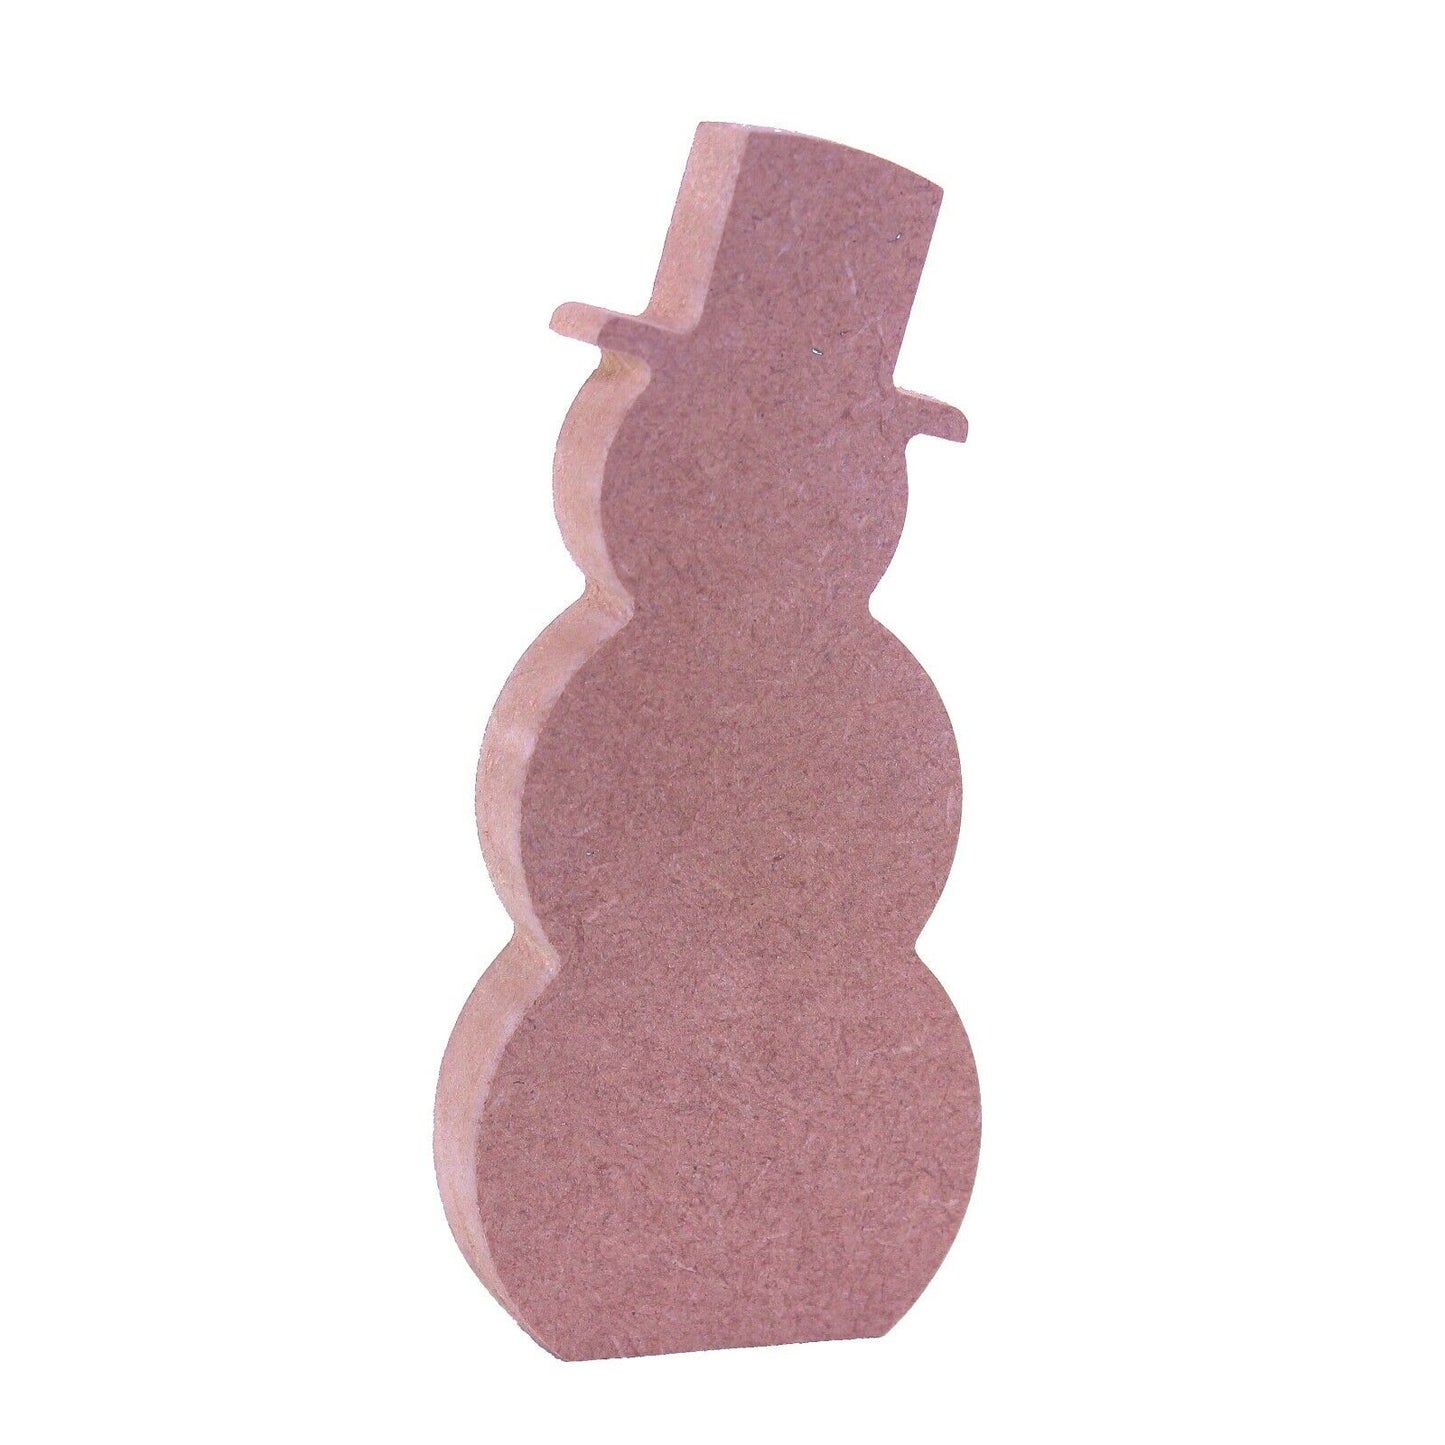 Free Standing 18mm MDF Armless Snowman Craft Shape Various Sizes. Christmas Snow